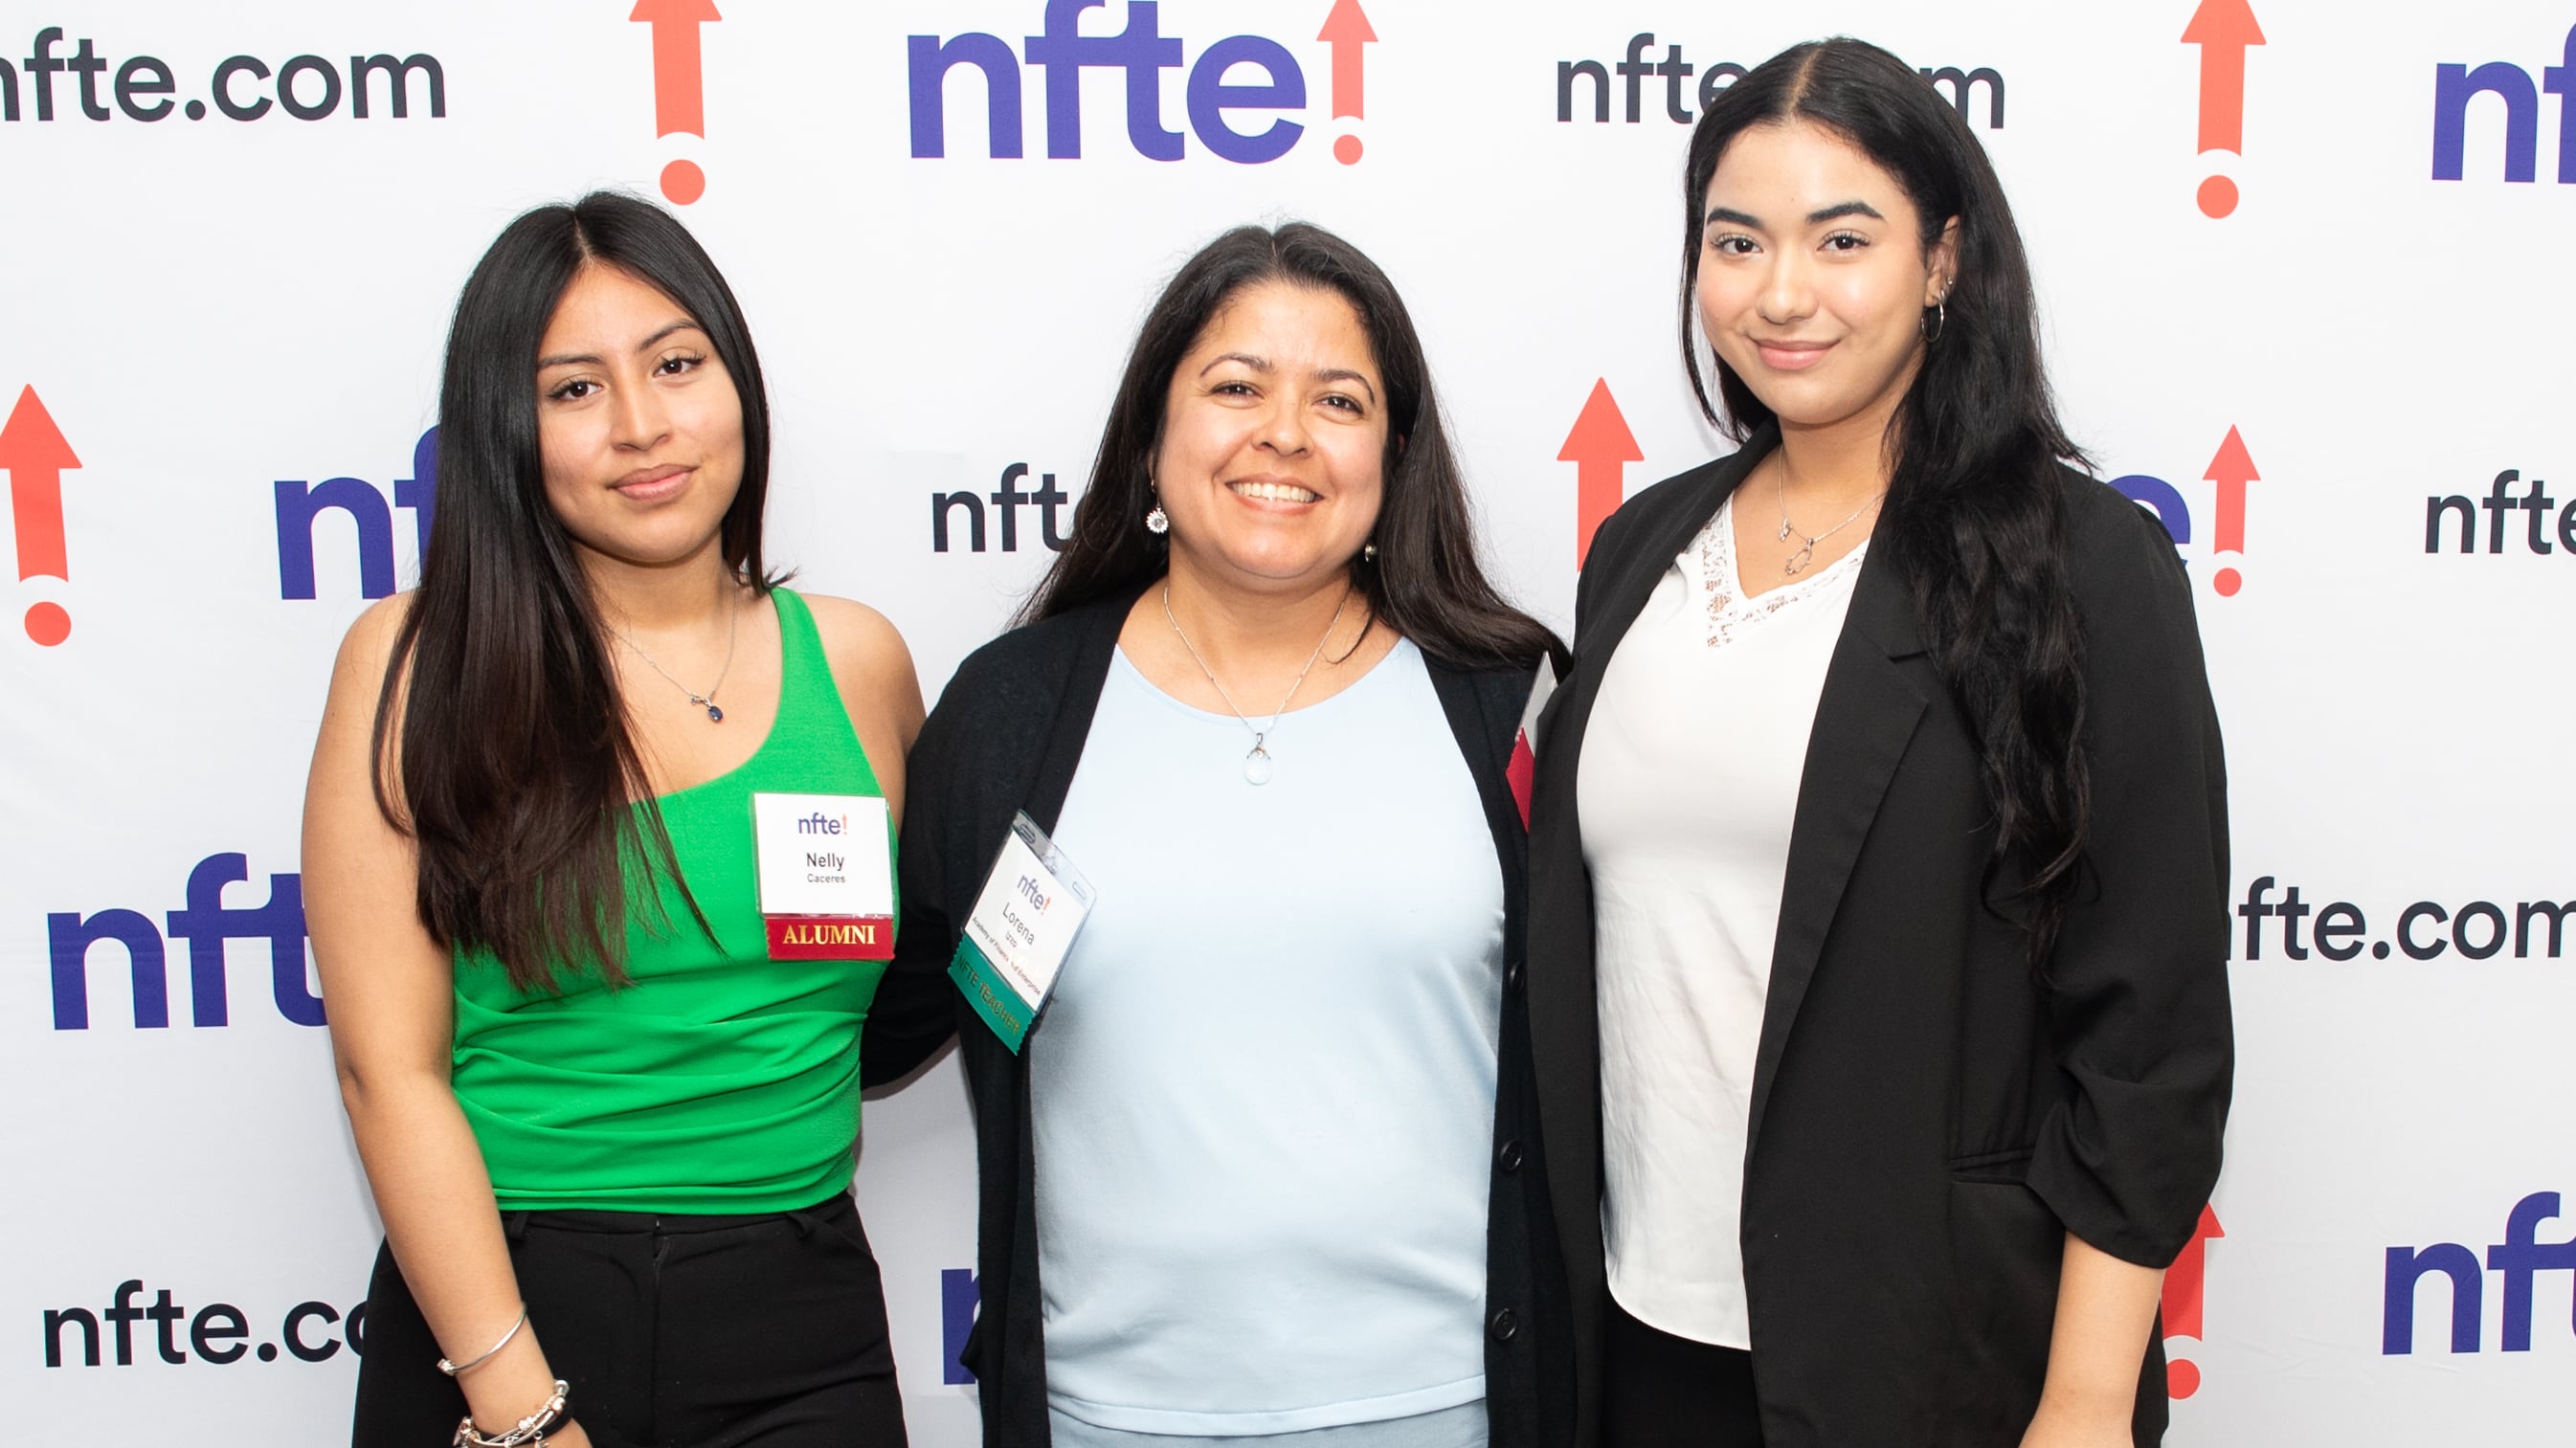 Three women with long black hair pose for picture in front of a wall that says "NFTE."